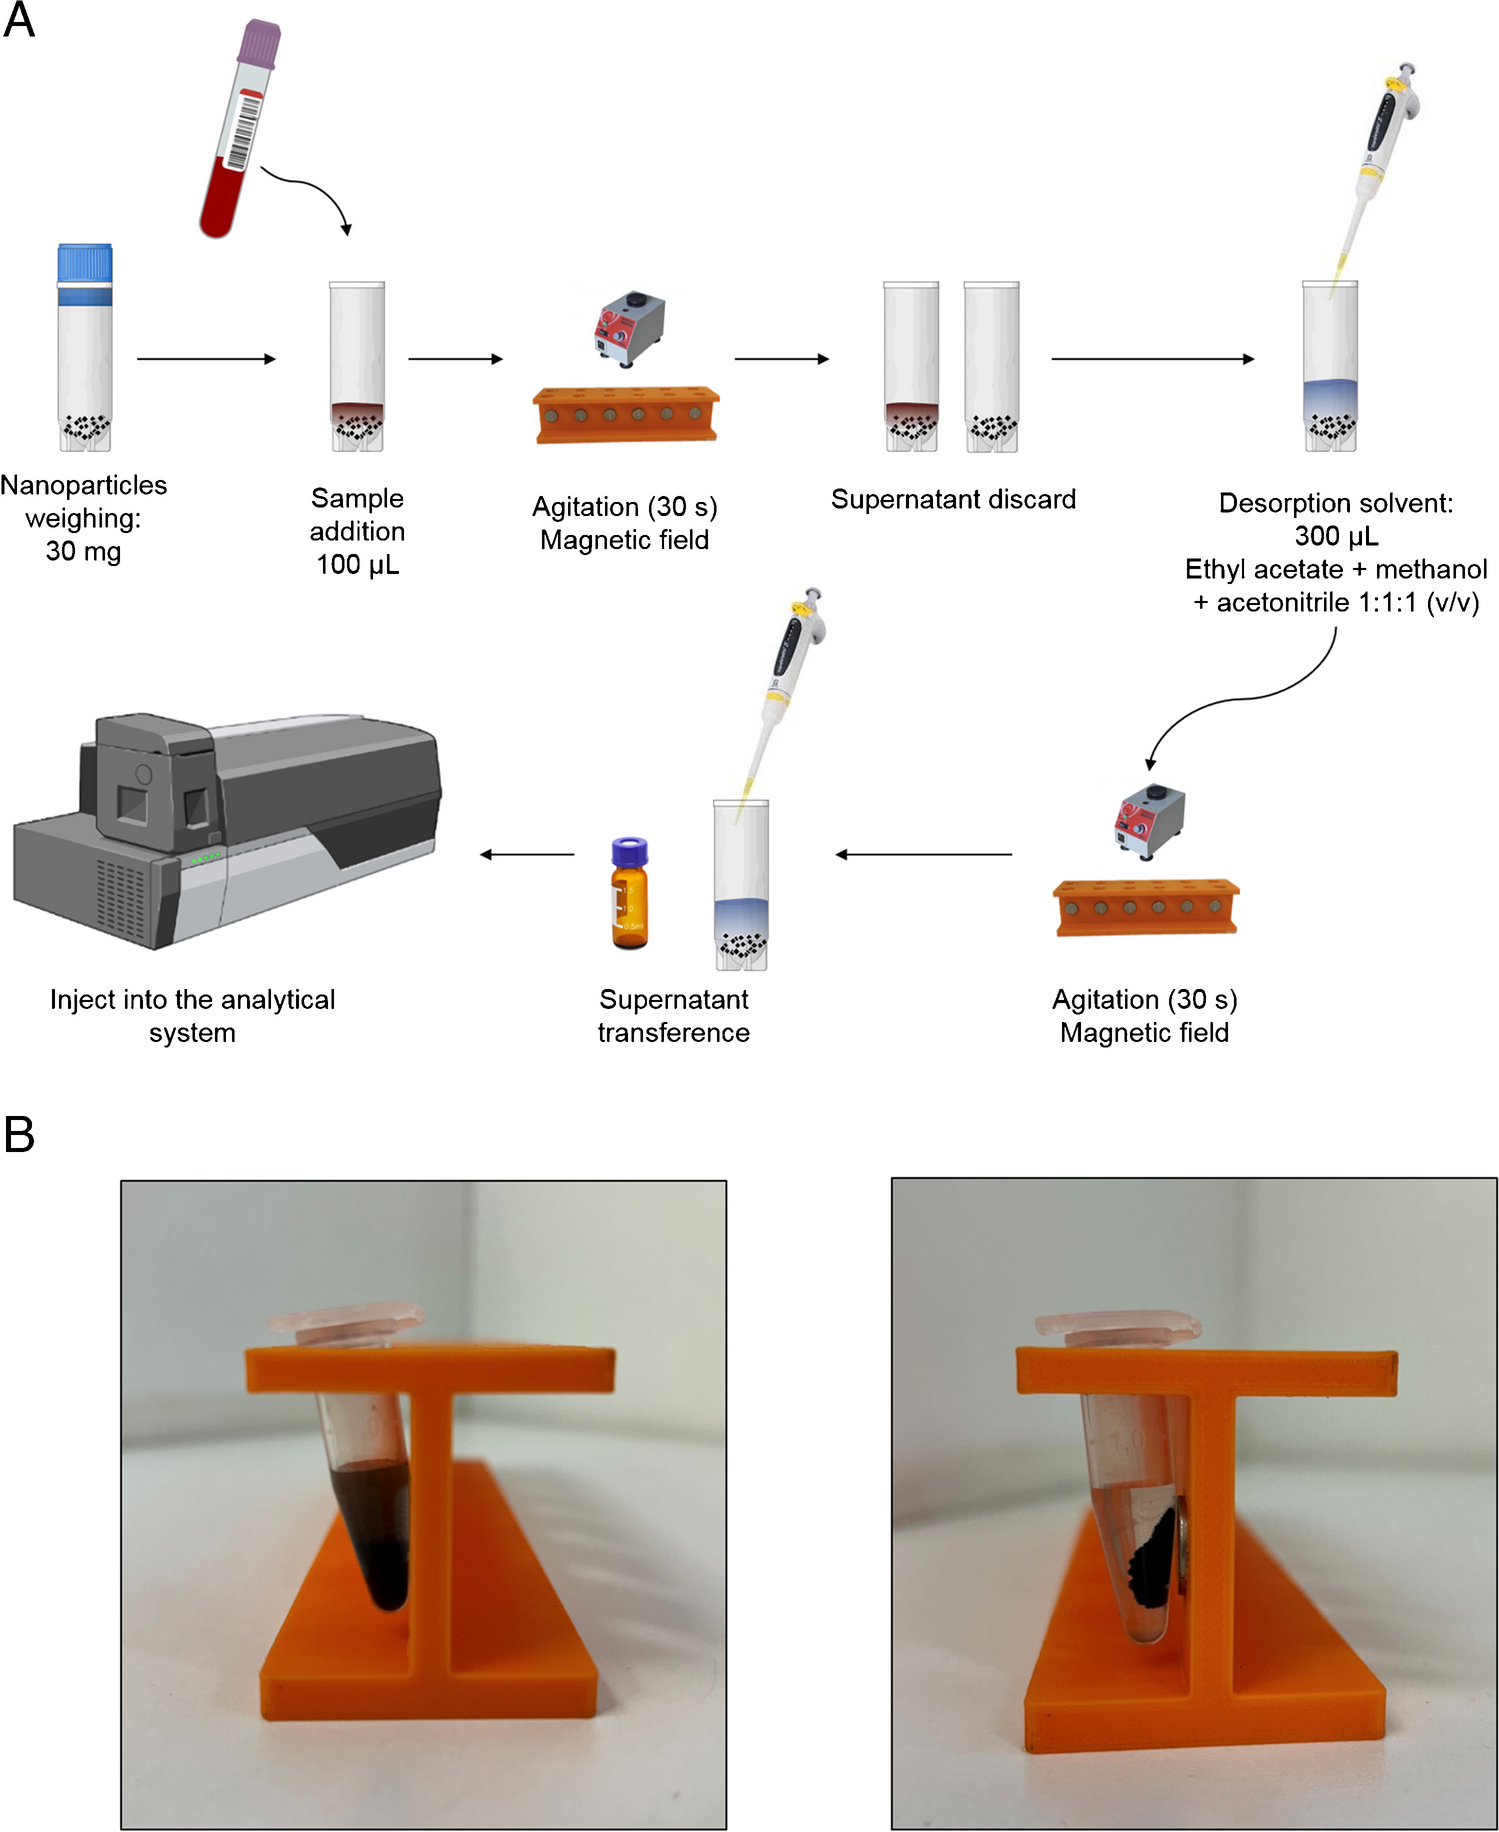 Development of an innovative analytical method for forensic detection of cocaine, antidepressants, and metabolites in postmortem blood using magnetic nanoparticles